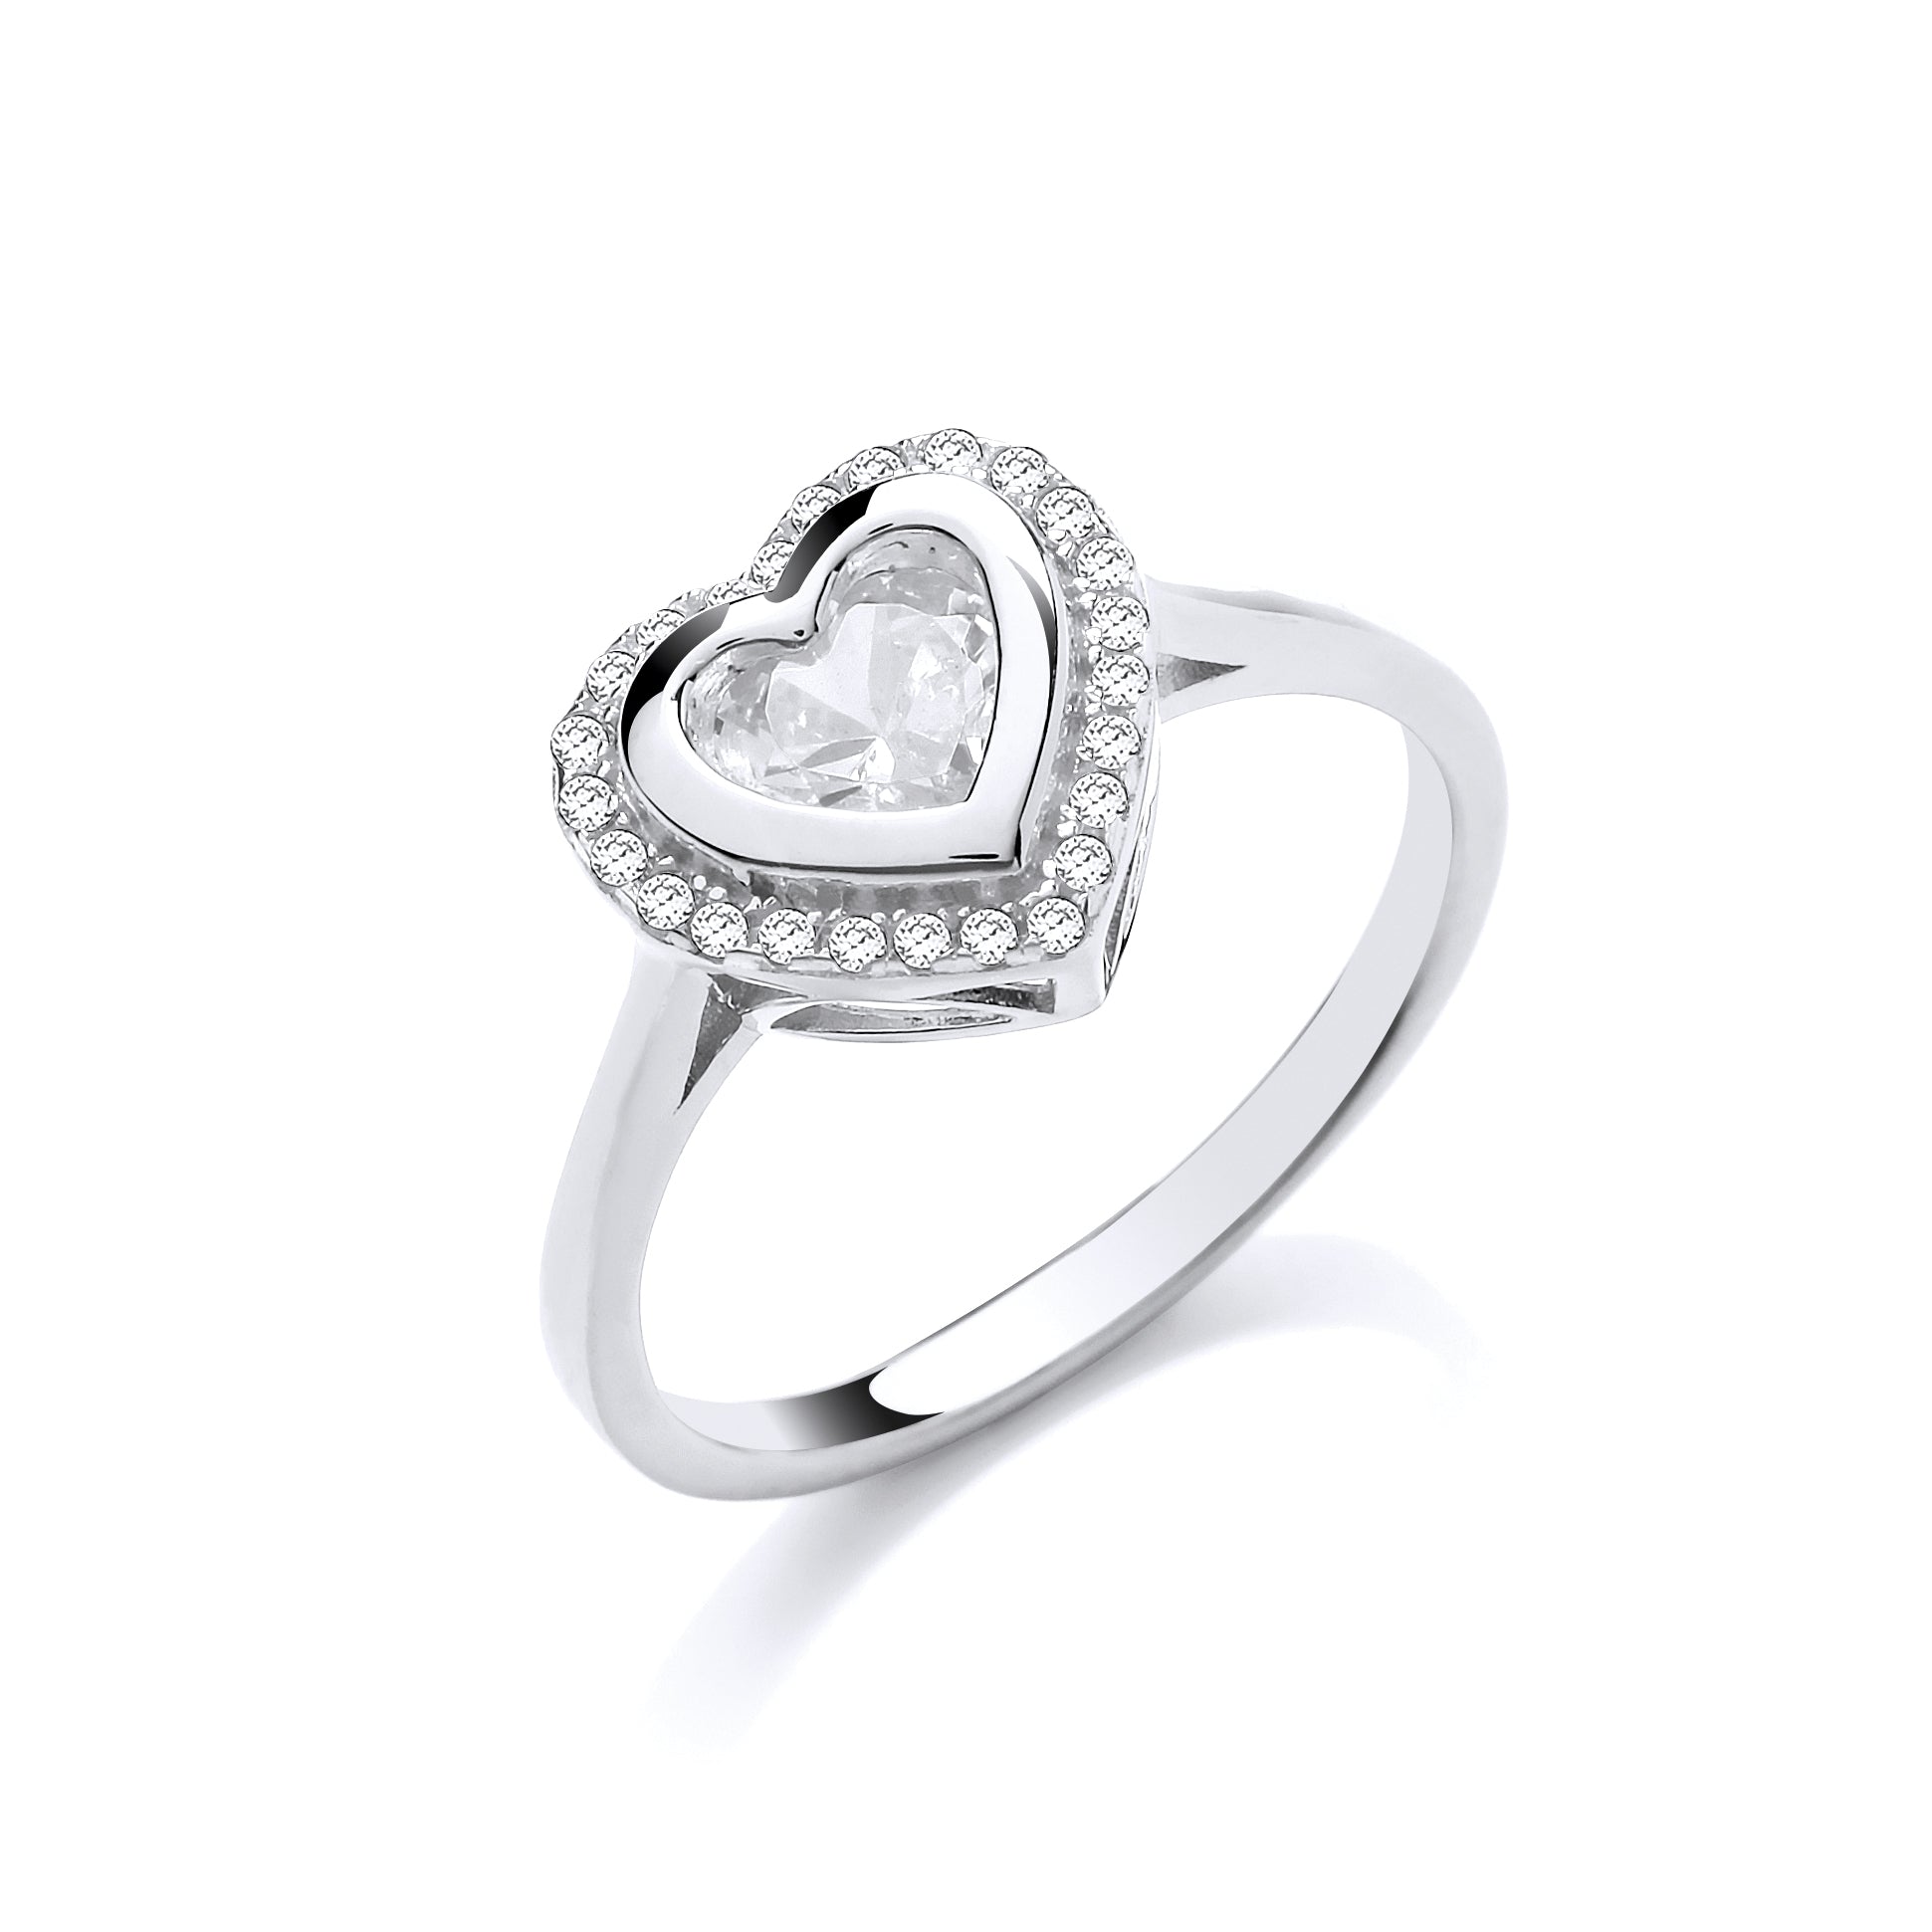 Silver  CZ Halo Love Heart Cluster Ring - GVR838